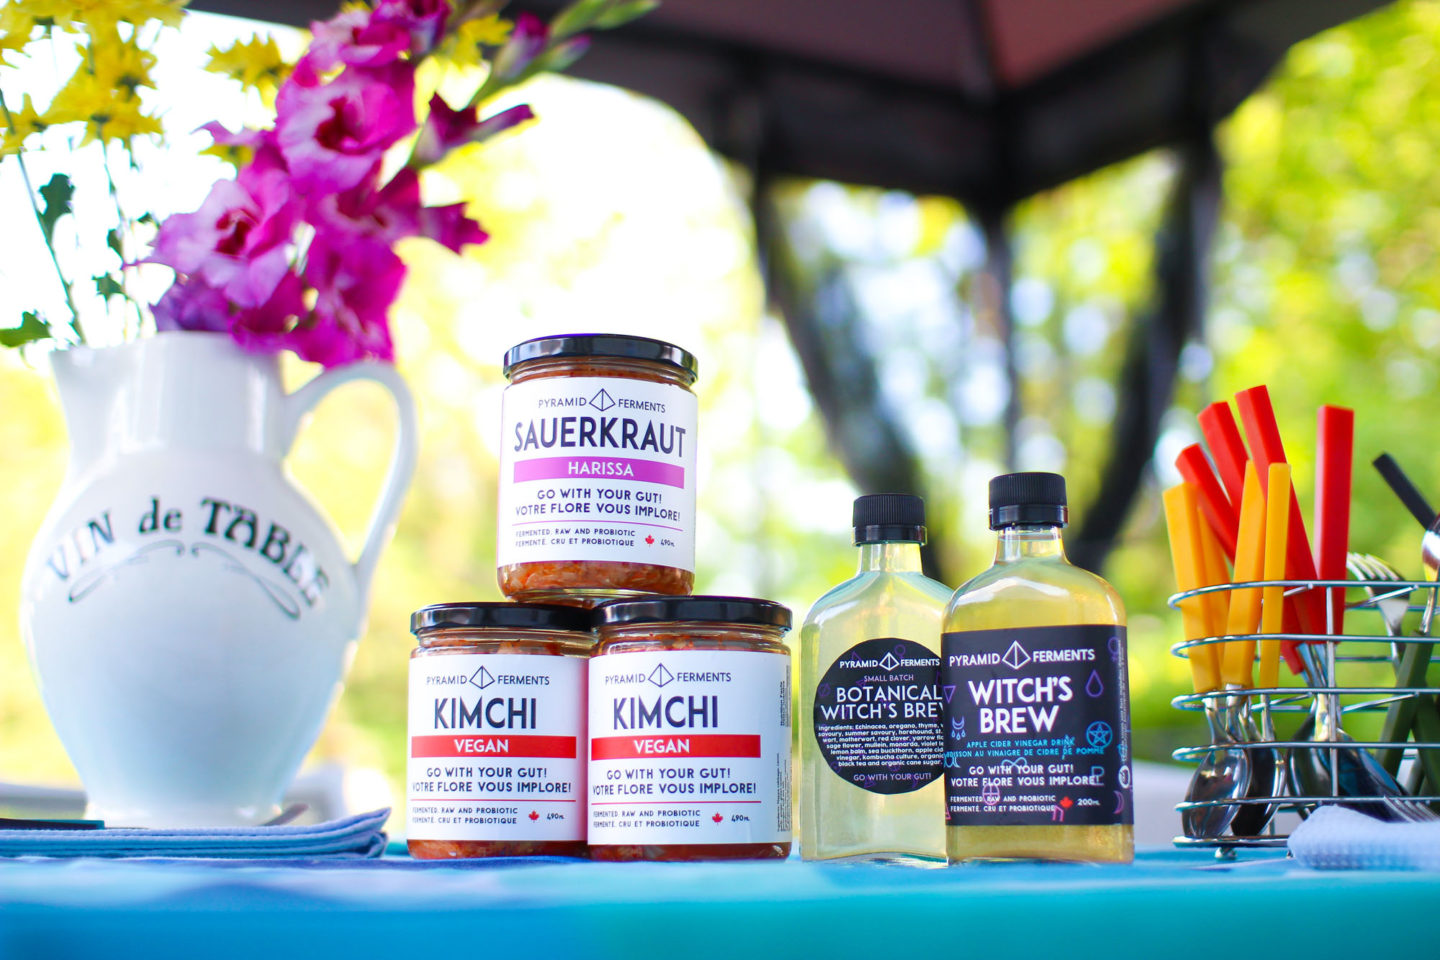 pyramid ferments products including kimchi jars, sauerkraut, and witch's brew